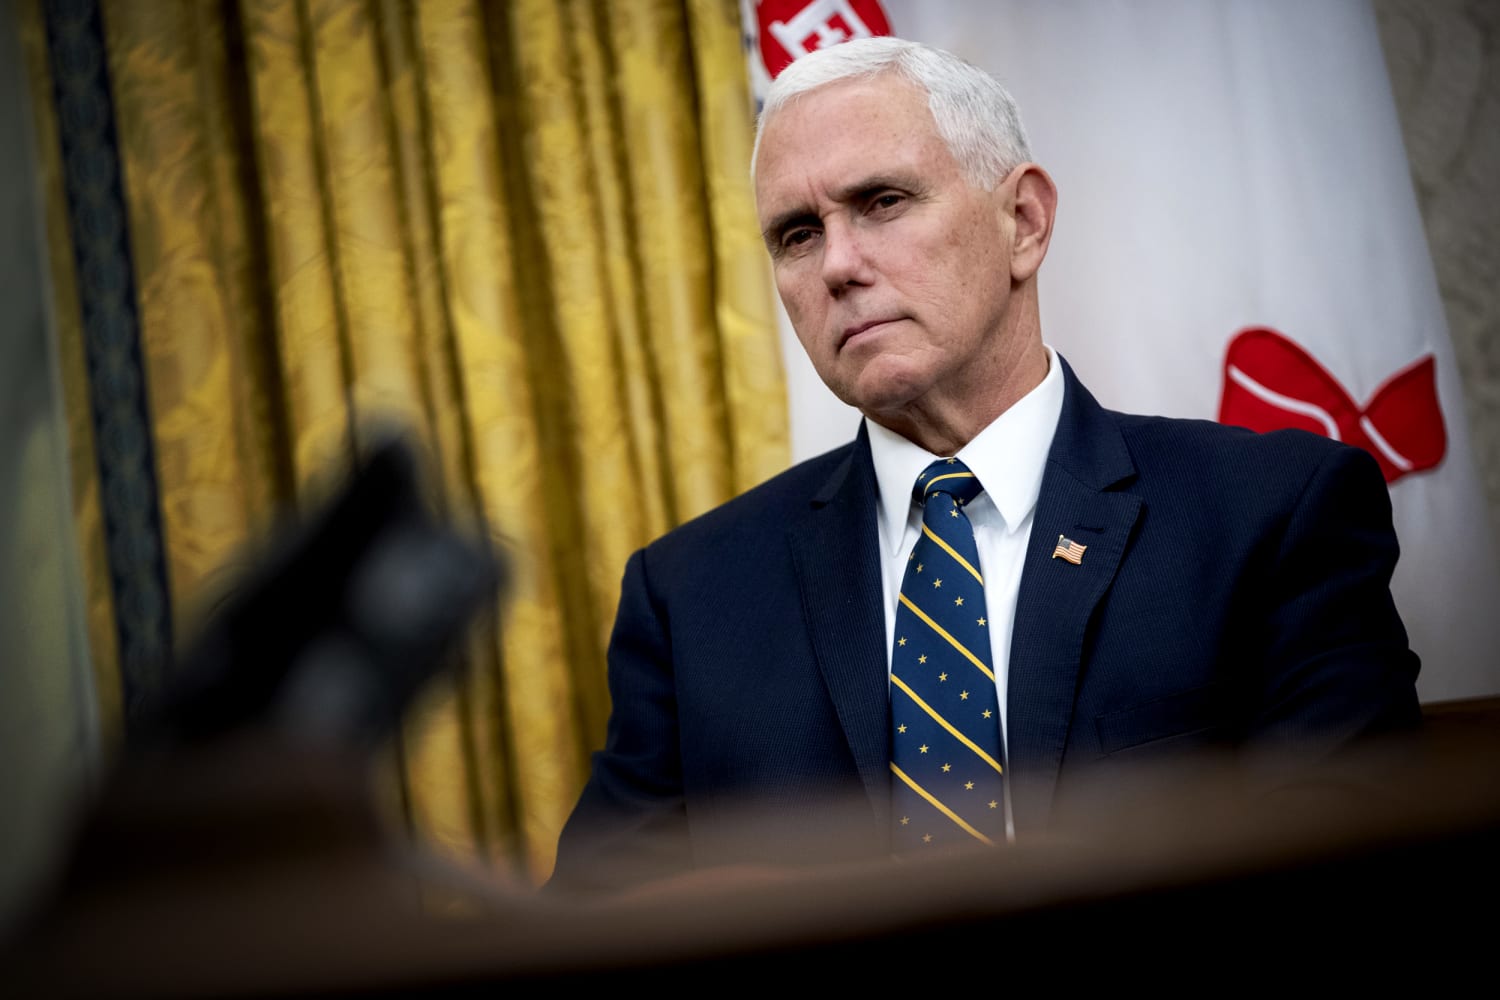 Pence Praises Rule That Would Let Adoption Agencies Exclude Gay